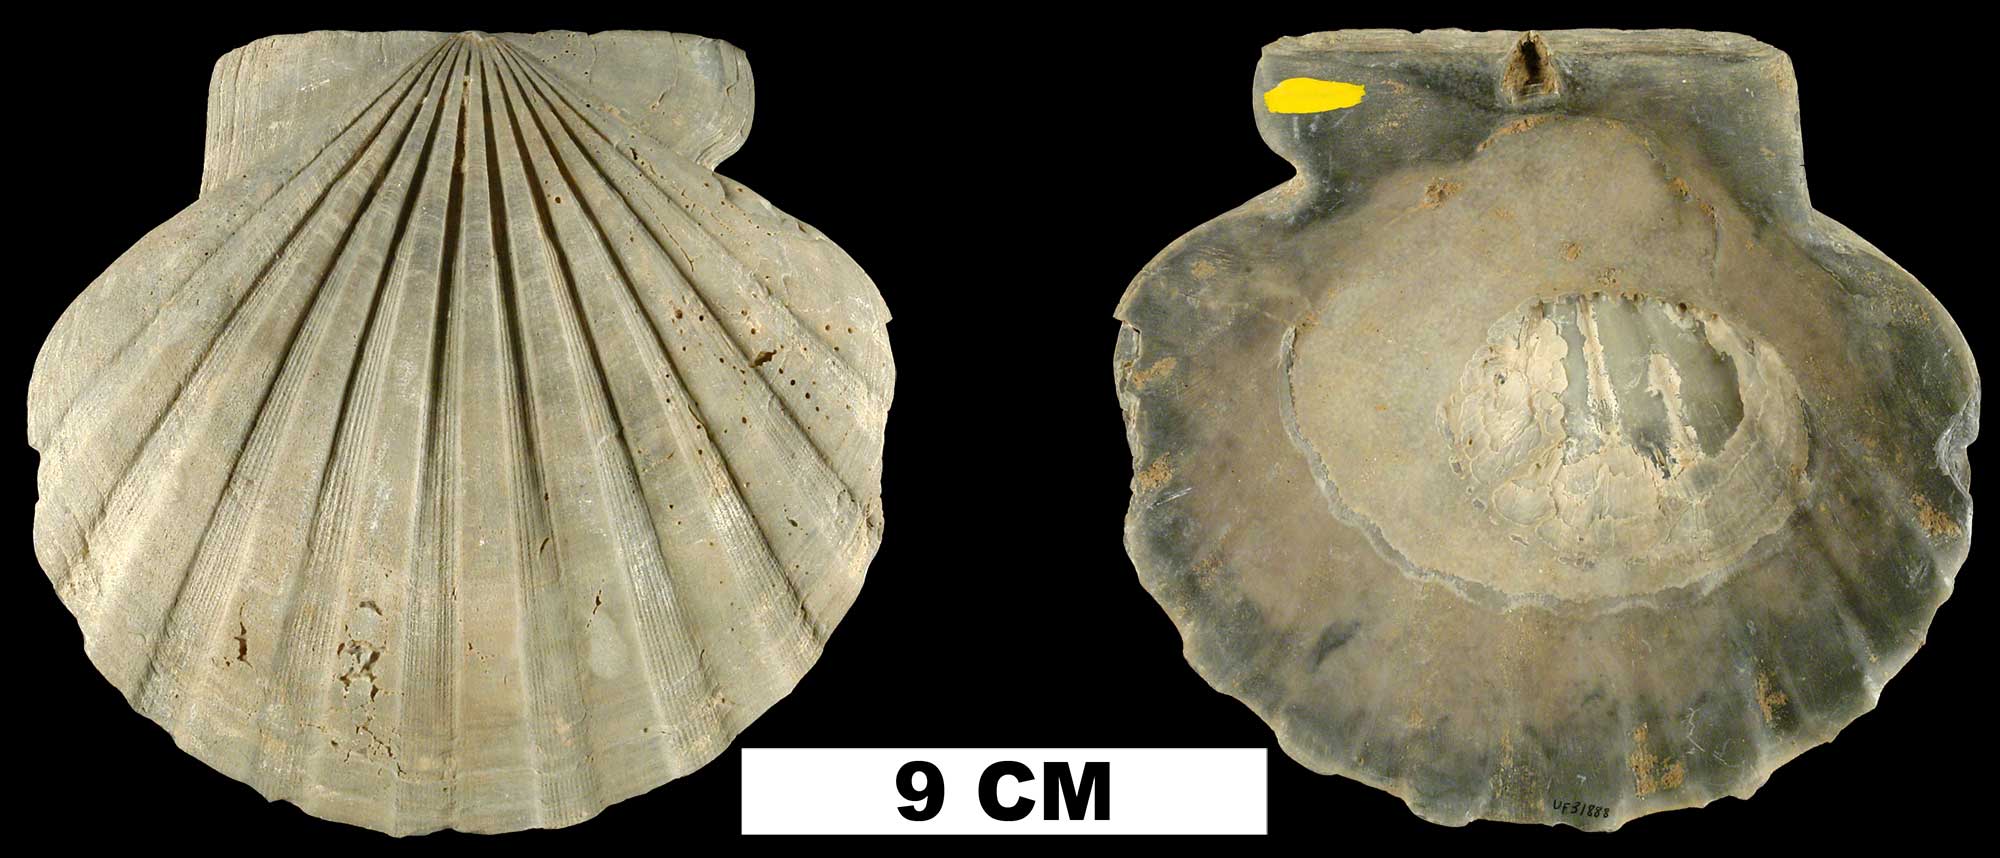 Image shows photographs of the outer and inner surfaces of Chesapecten jeffersonius.